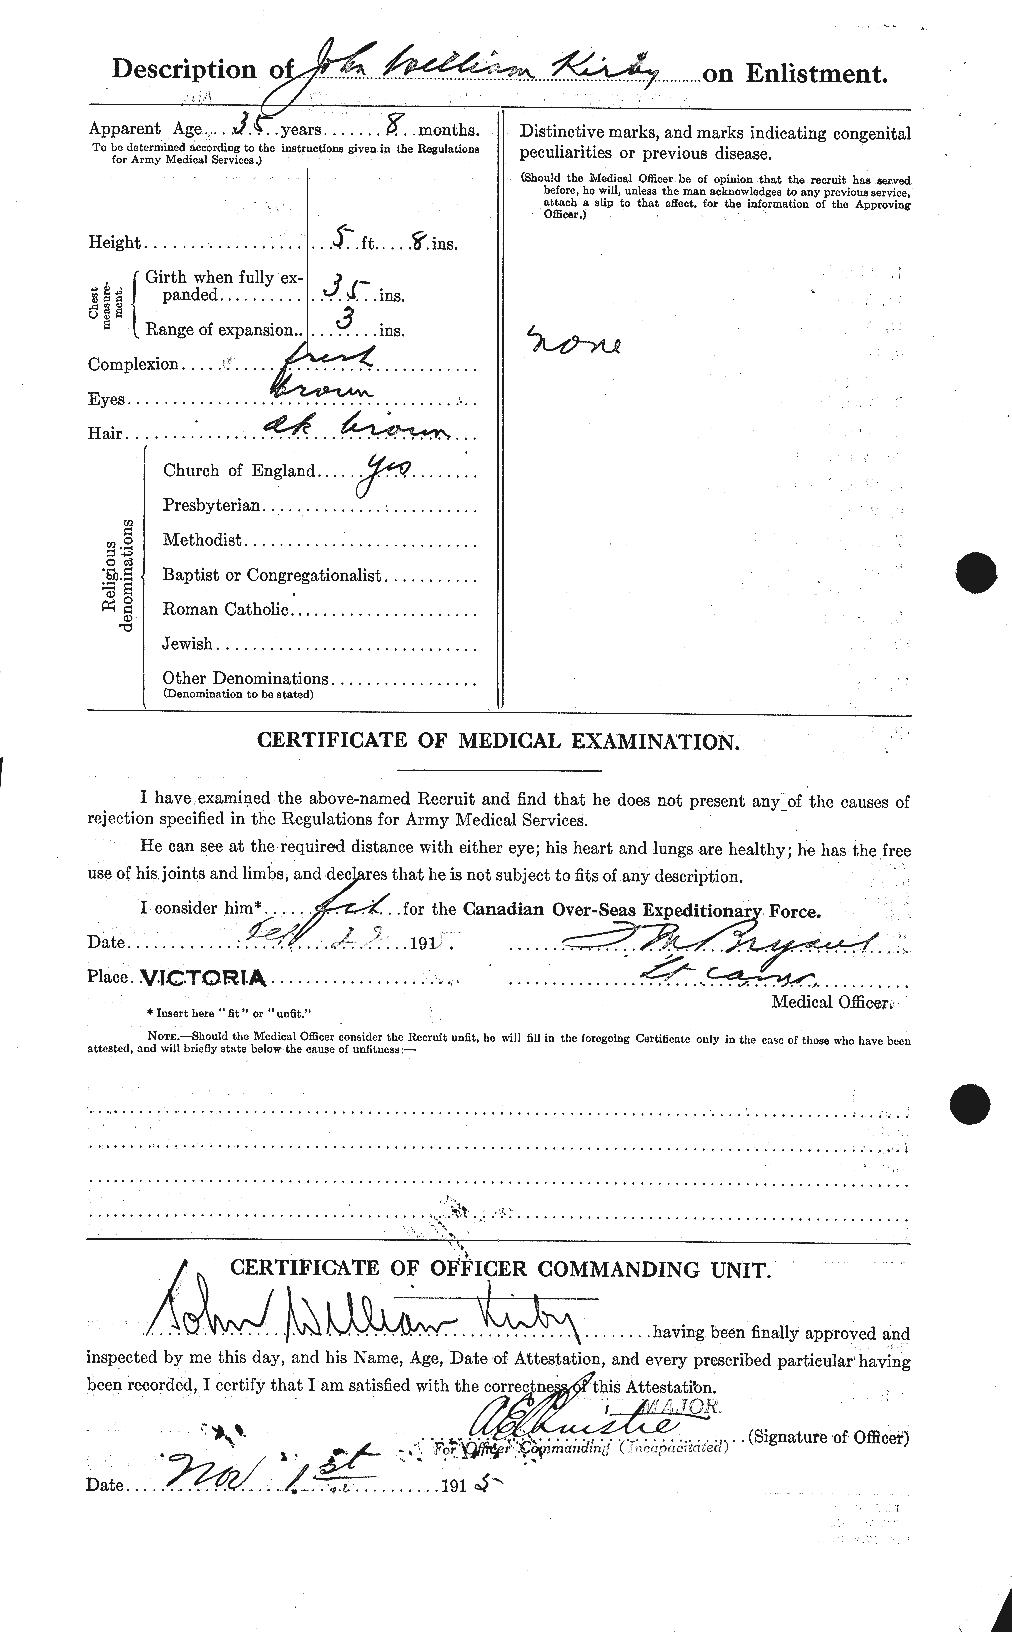 Personnel Records of the First World War - CEF 437238b